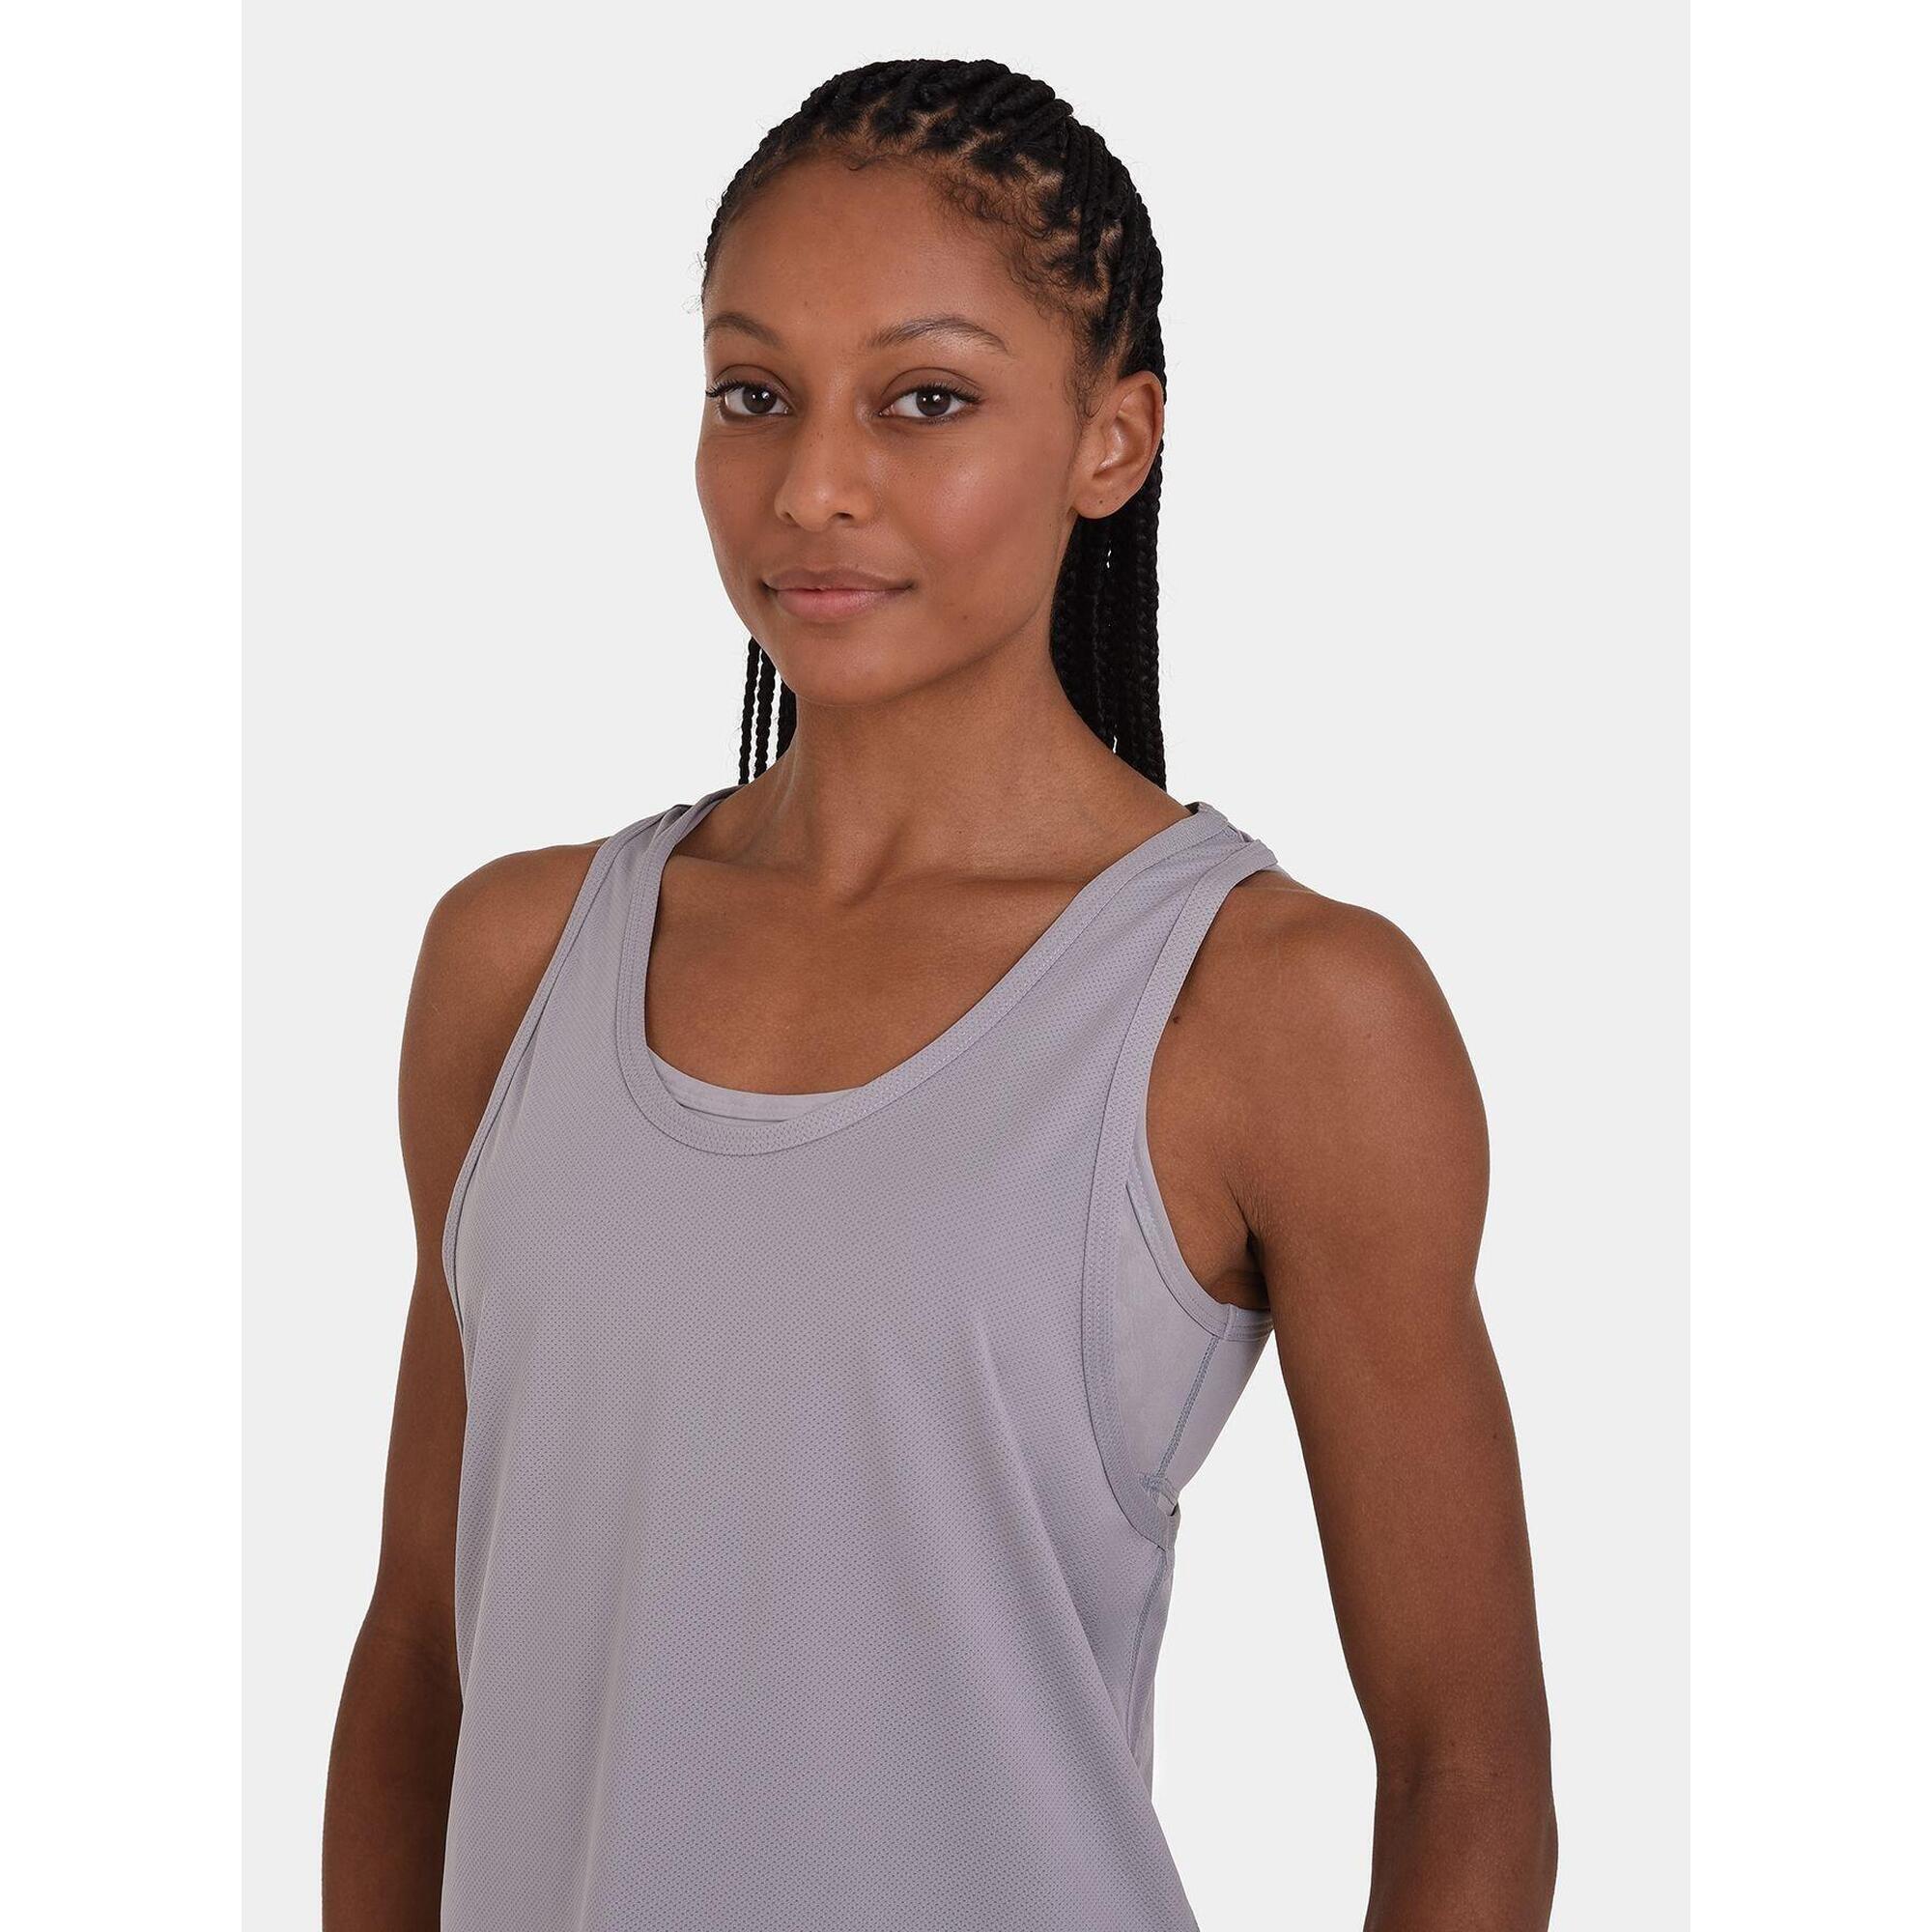 Courreges Satin Square Top in Black Womens Clothing Tops Sleeveless and tank tops 